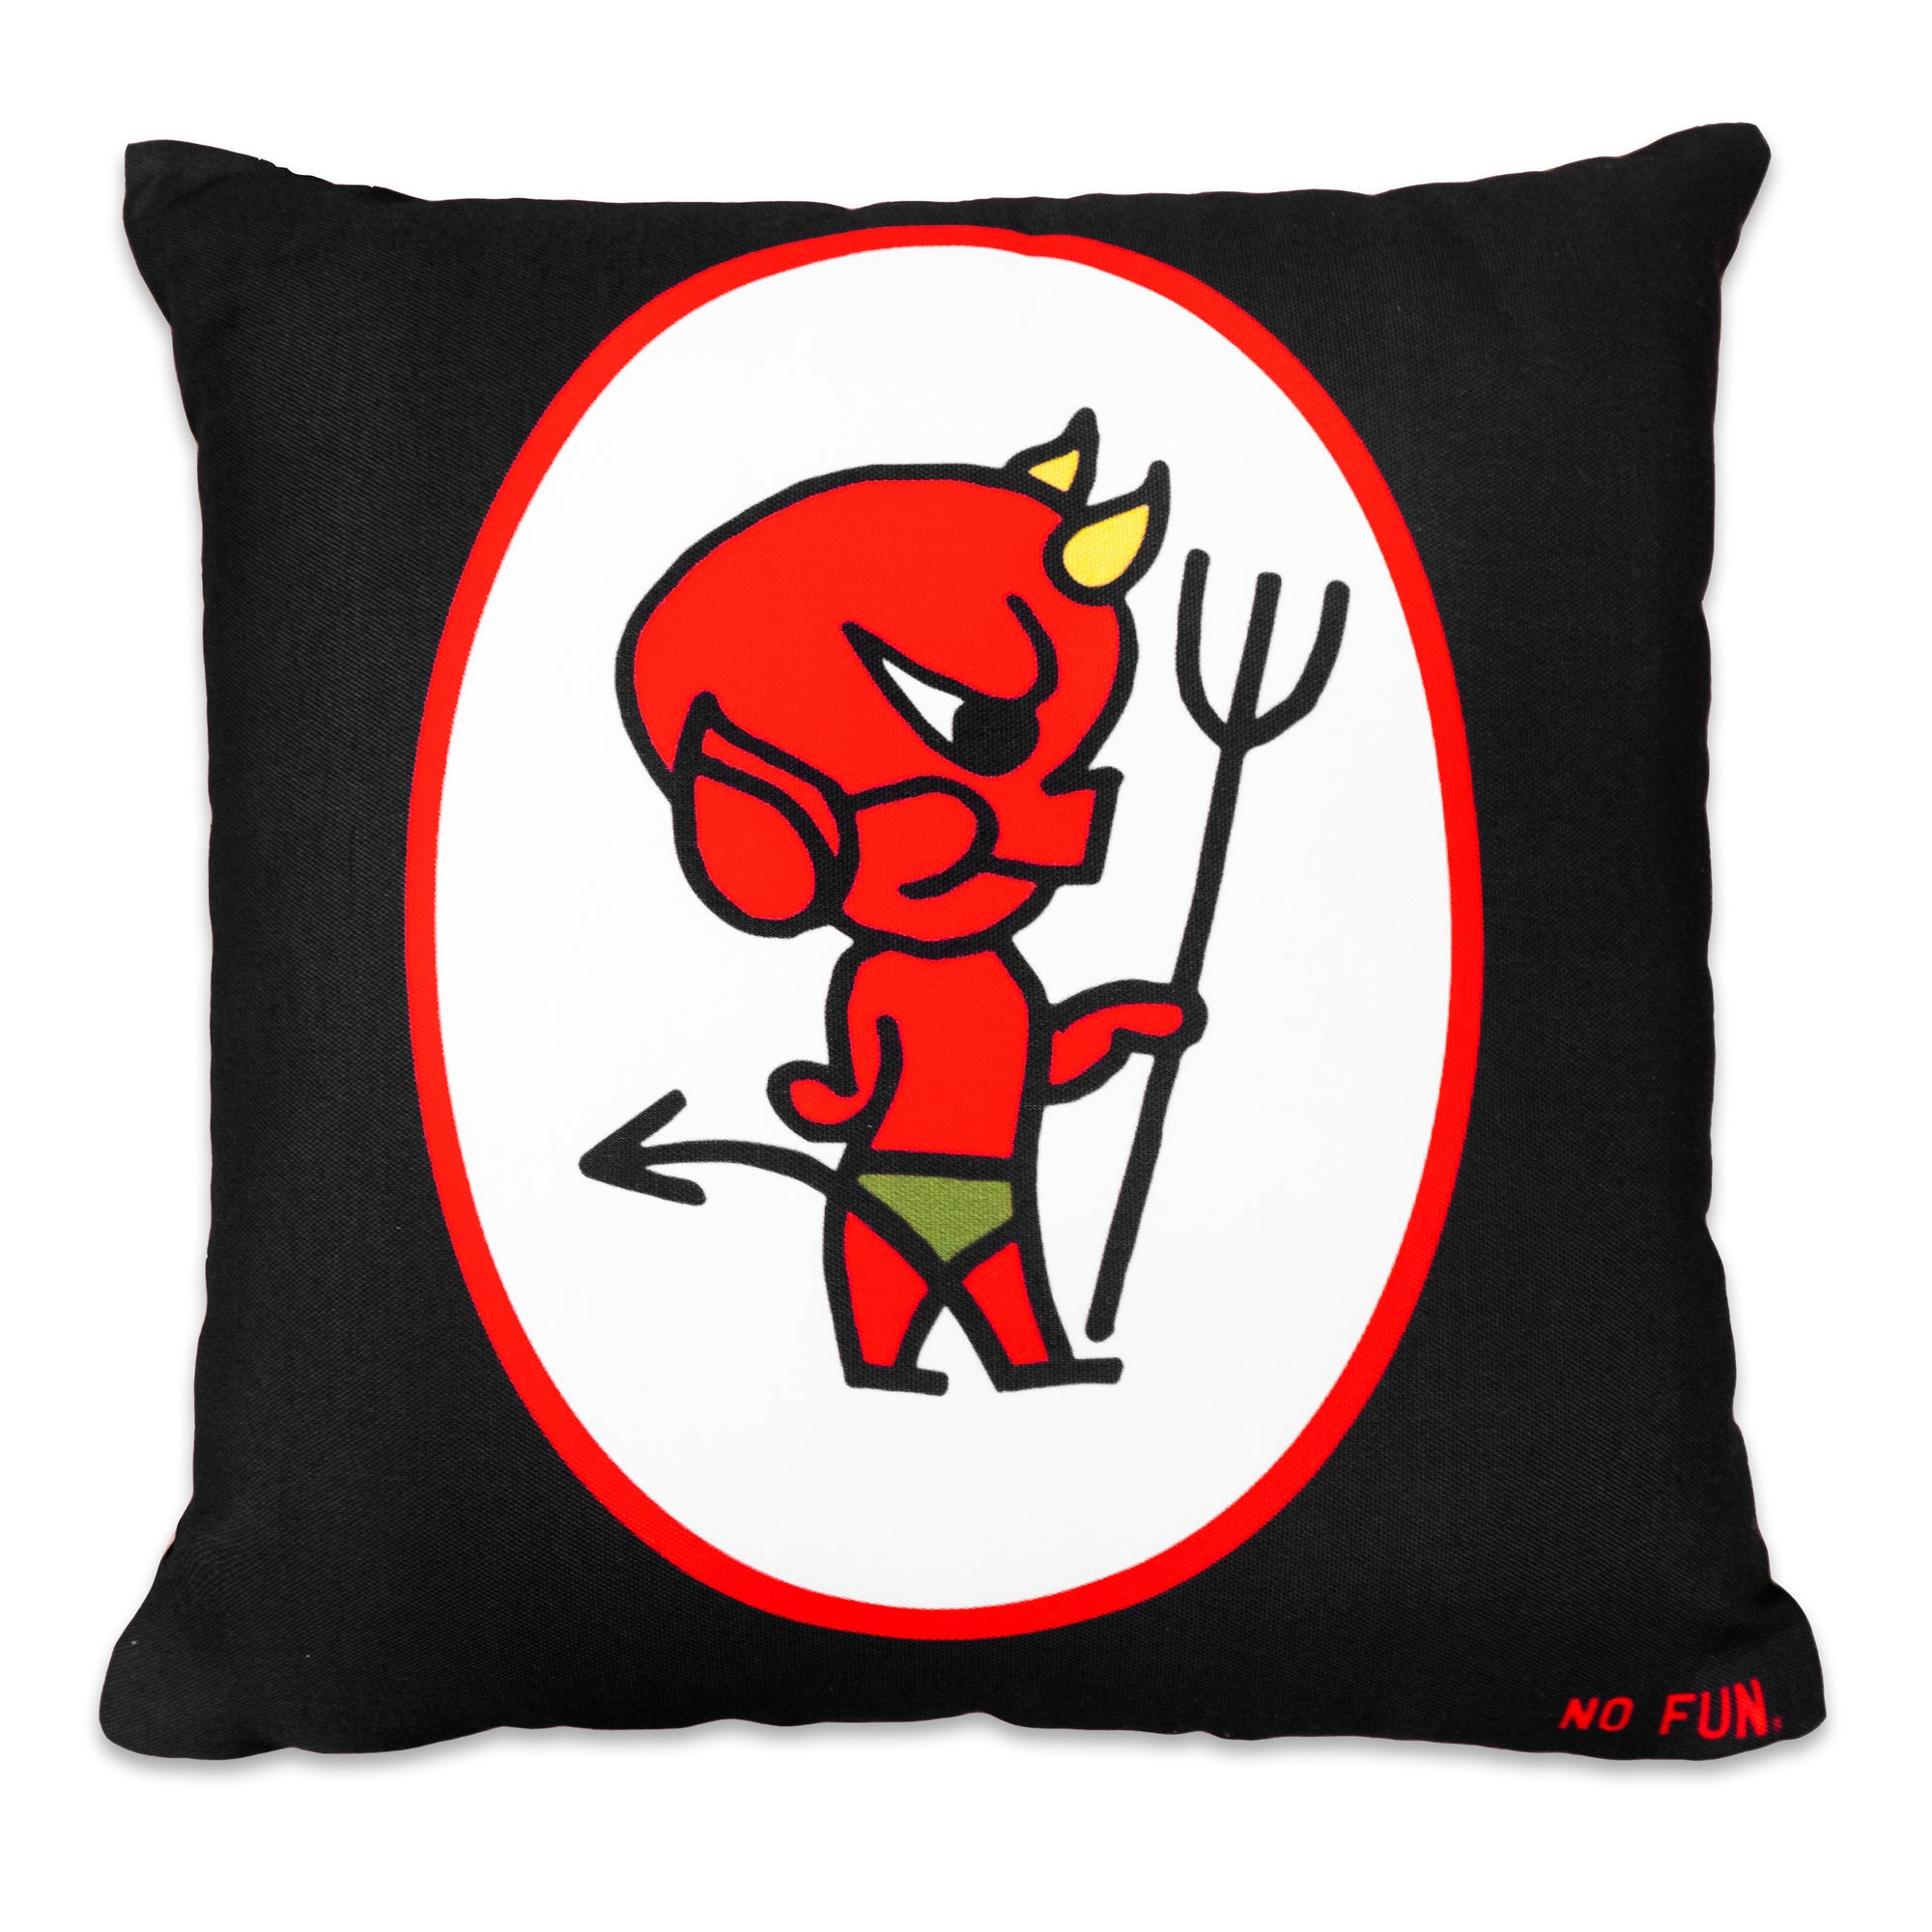 The "Devil & Black Widow" Pillow by No Fun®. Pillow is black, with a double sided design. One side has a red and white oval, with a cartoon devil in the center.  The devil character is red, has yellow horns, green shorts, black pitchfork.  There is a small, red, No Fun® logo in the bottom right hand corner of the pillow.